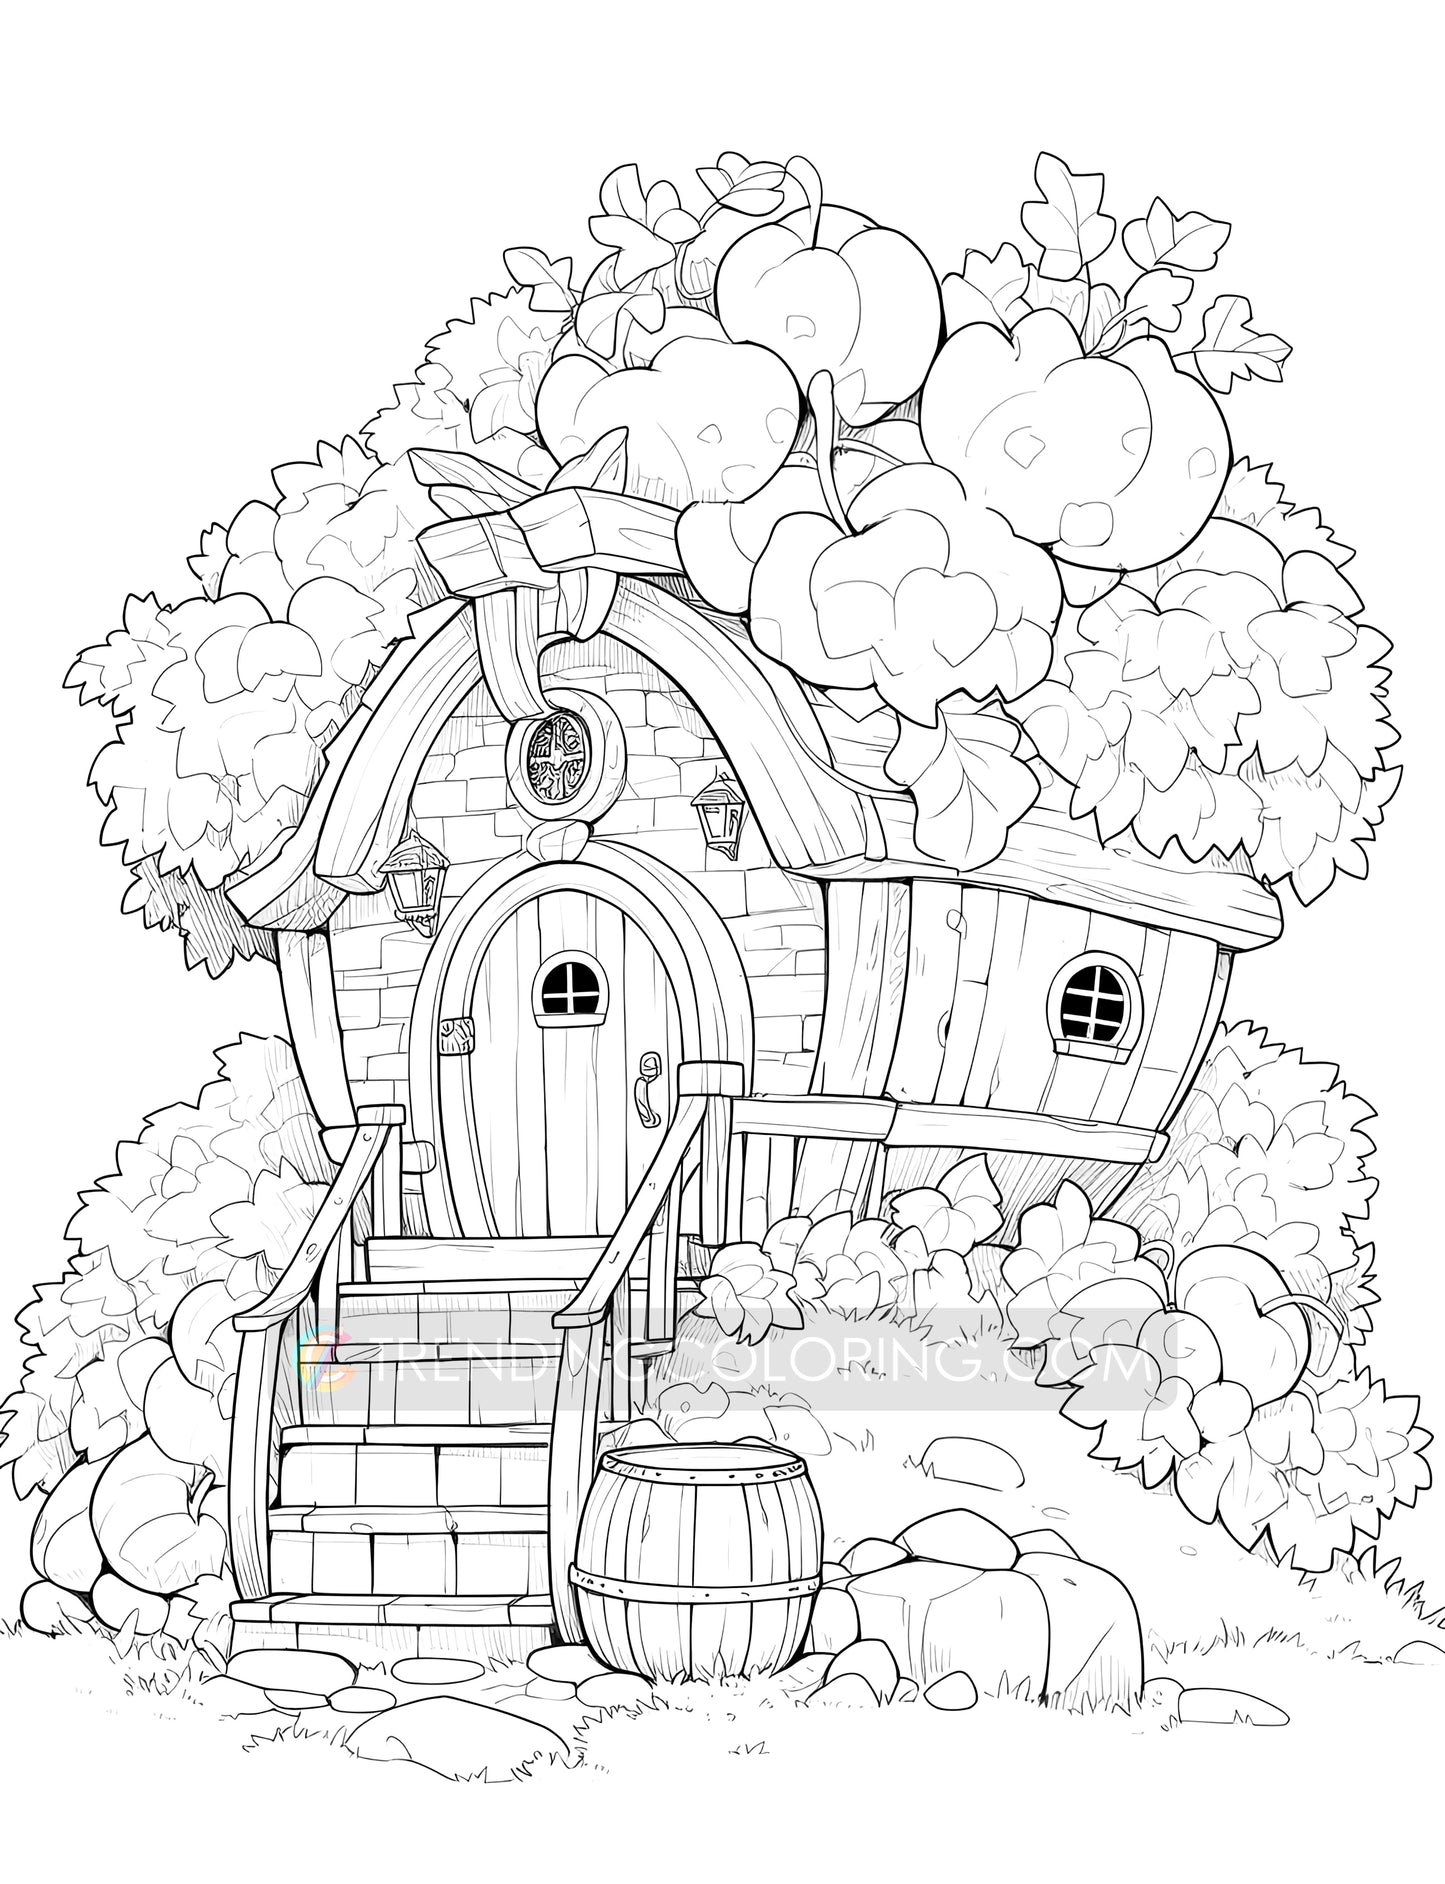 50 Pumpkin Fairy House Coloring Pages - Instant Download - Printable PDF